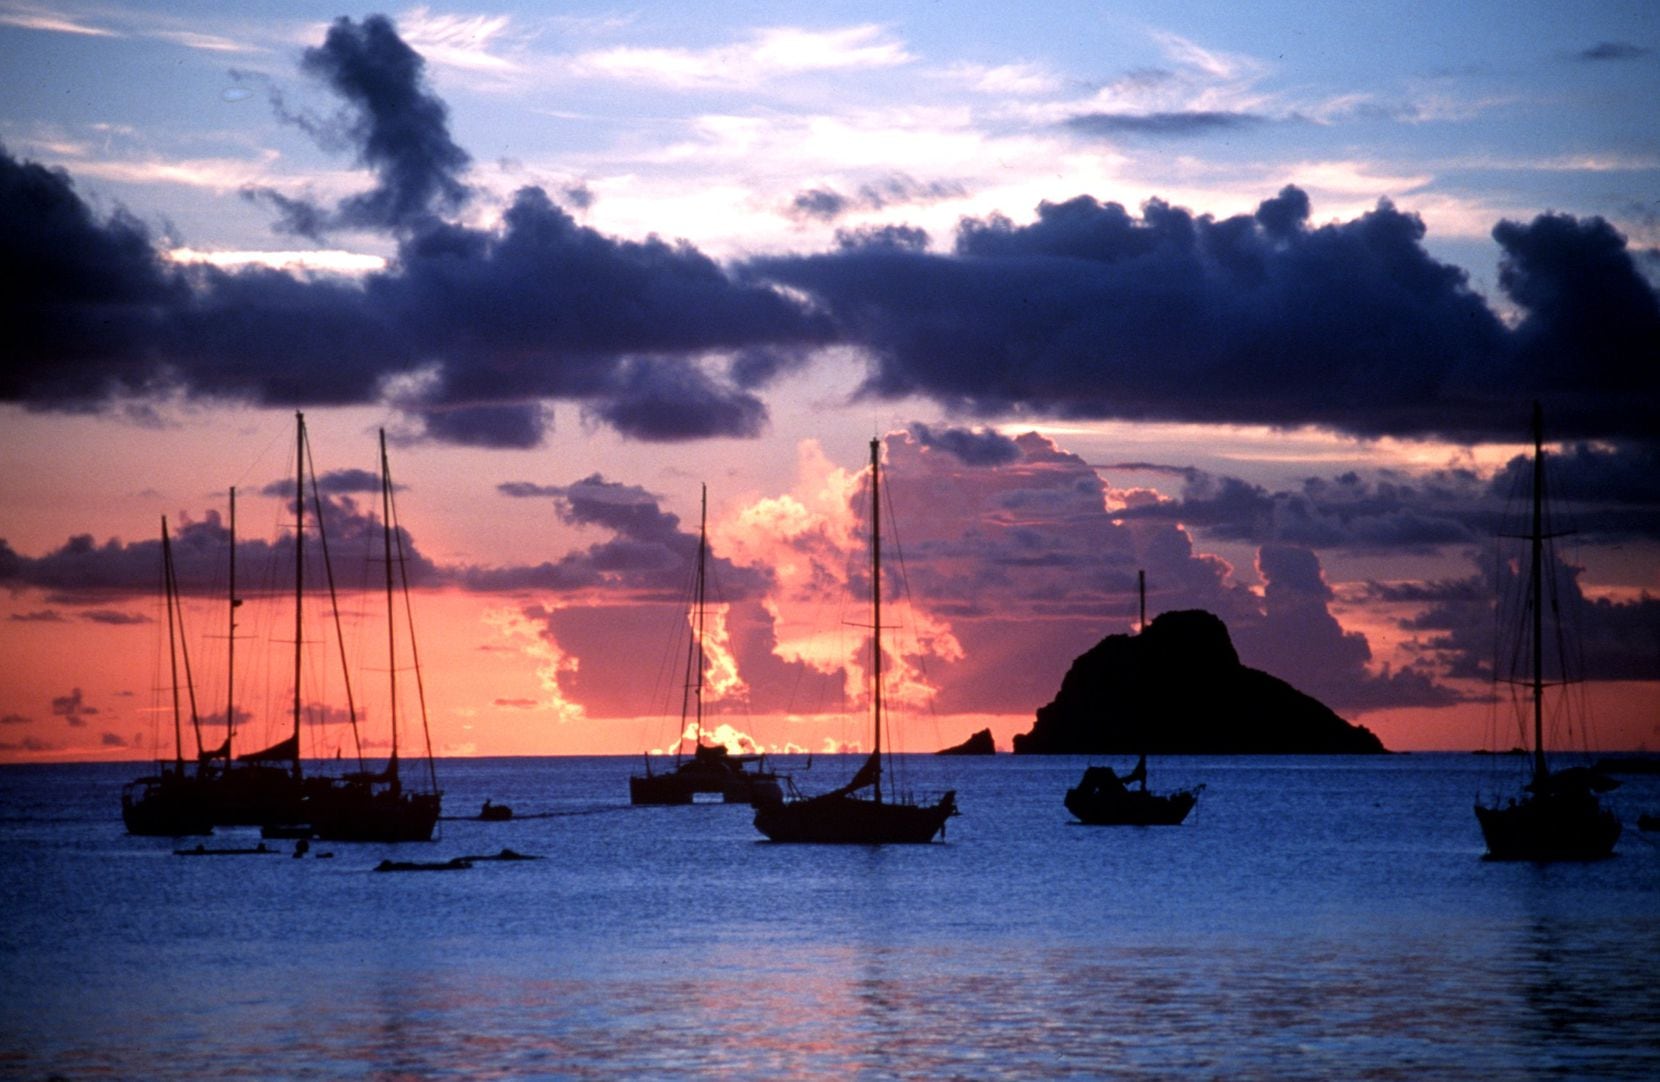 A sunset in Gustavia, St. Barts.